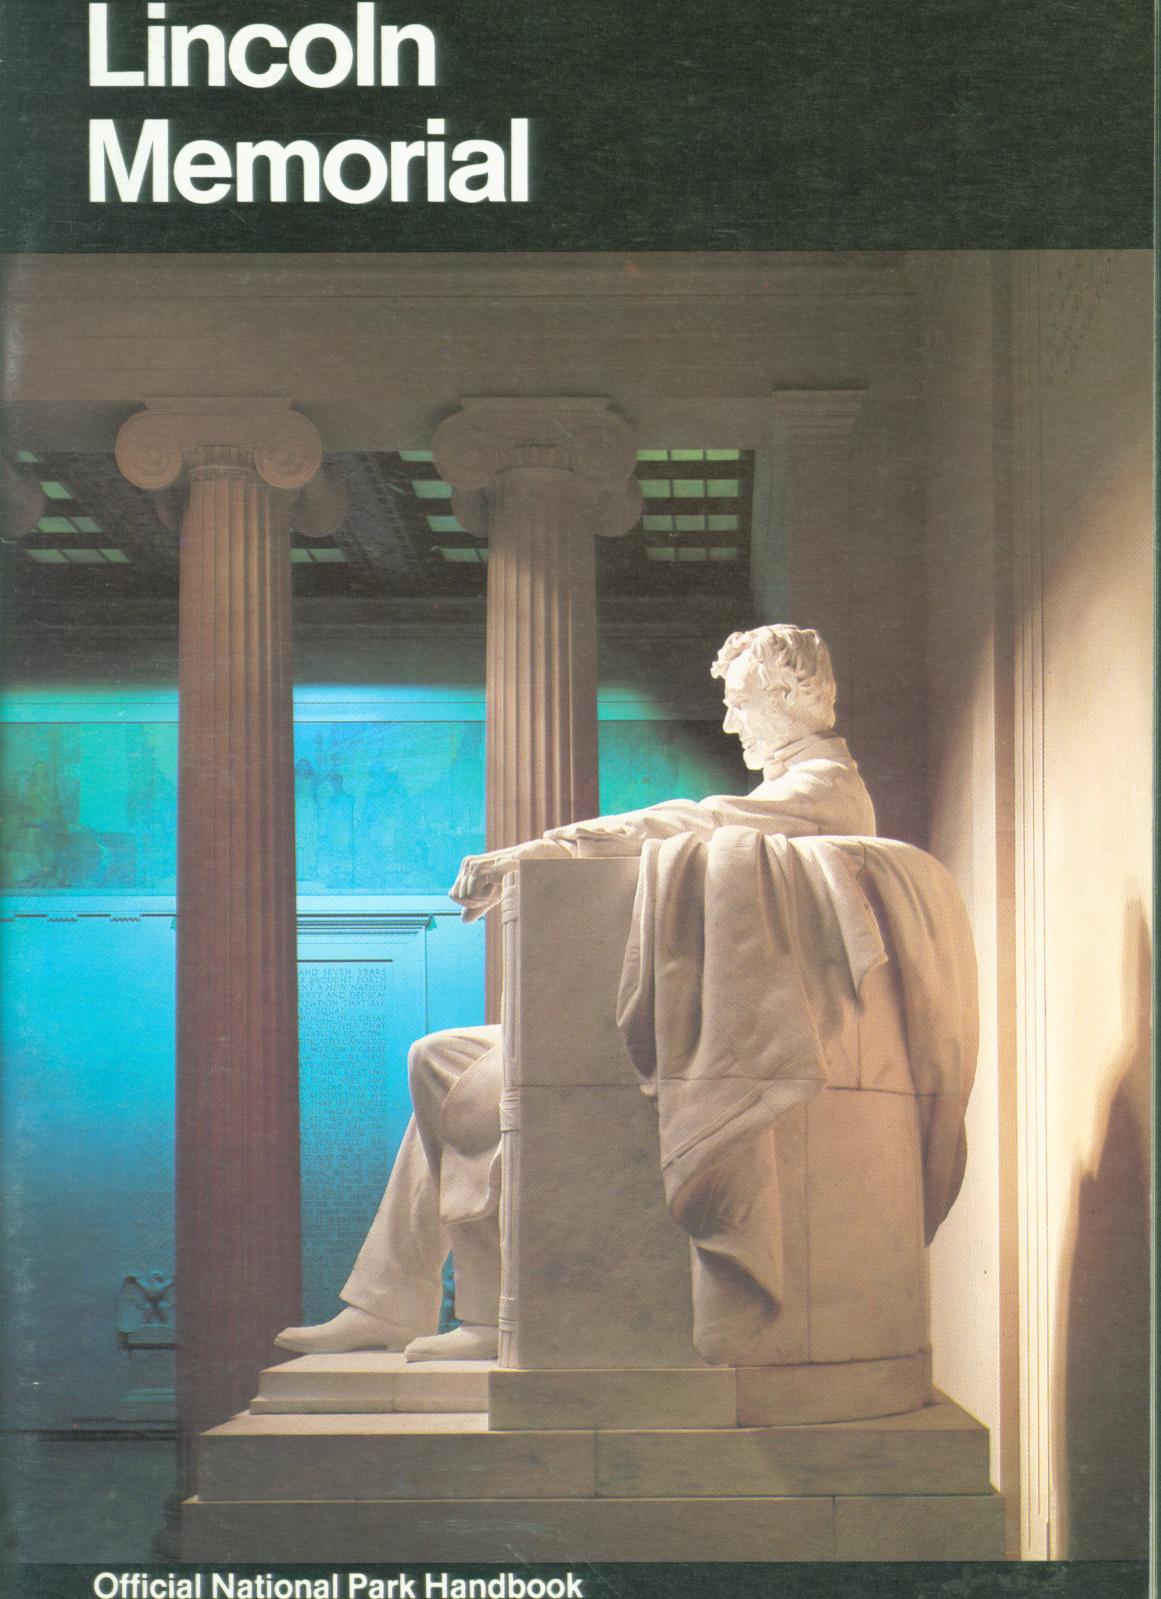 LINCOLN MEMORIAL: a guide to the Lincoln Memorial, District of Columbia.